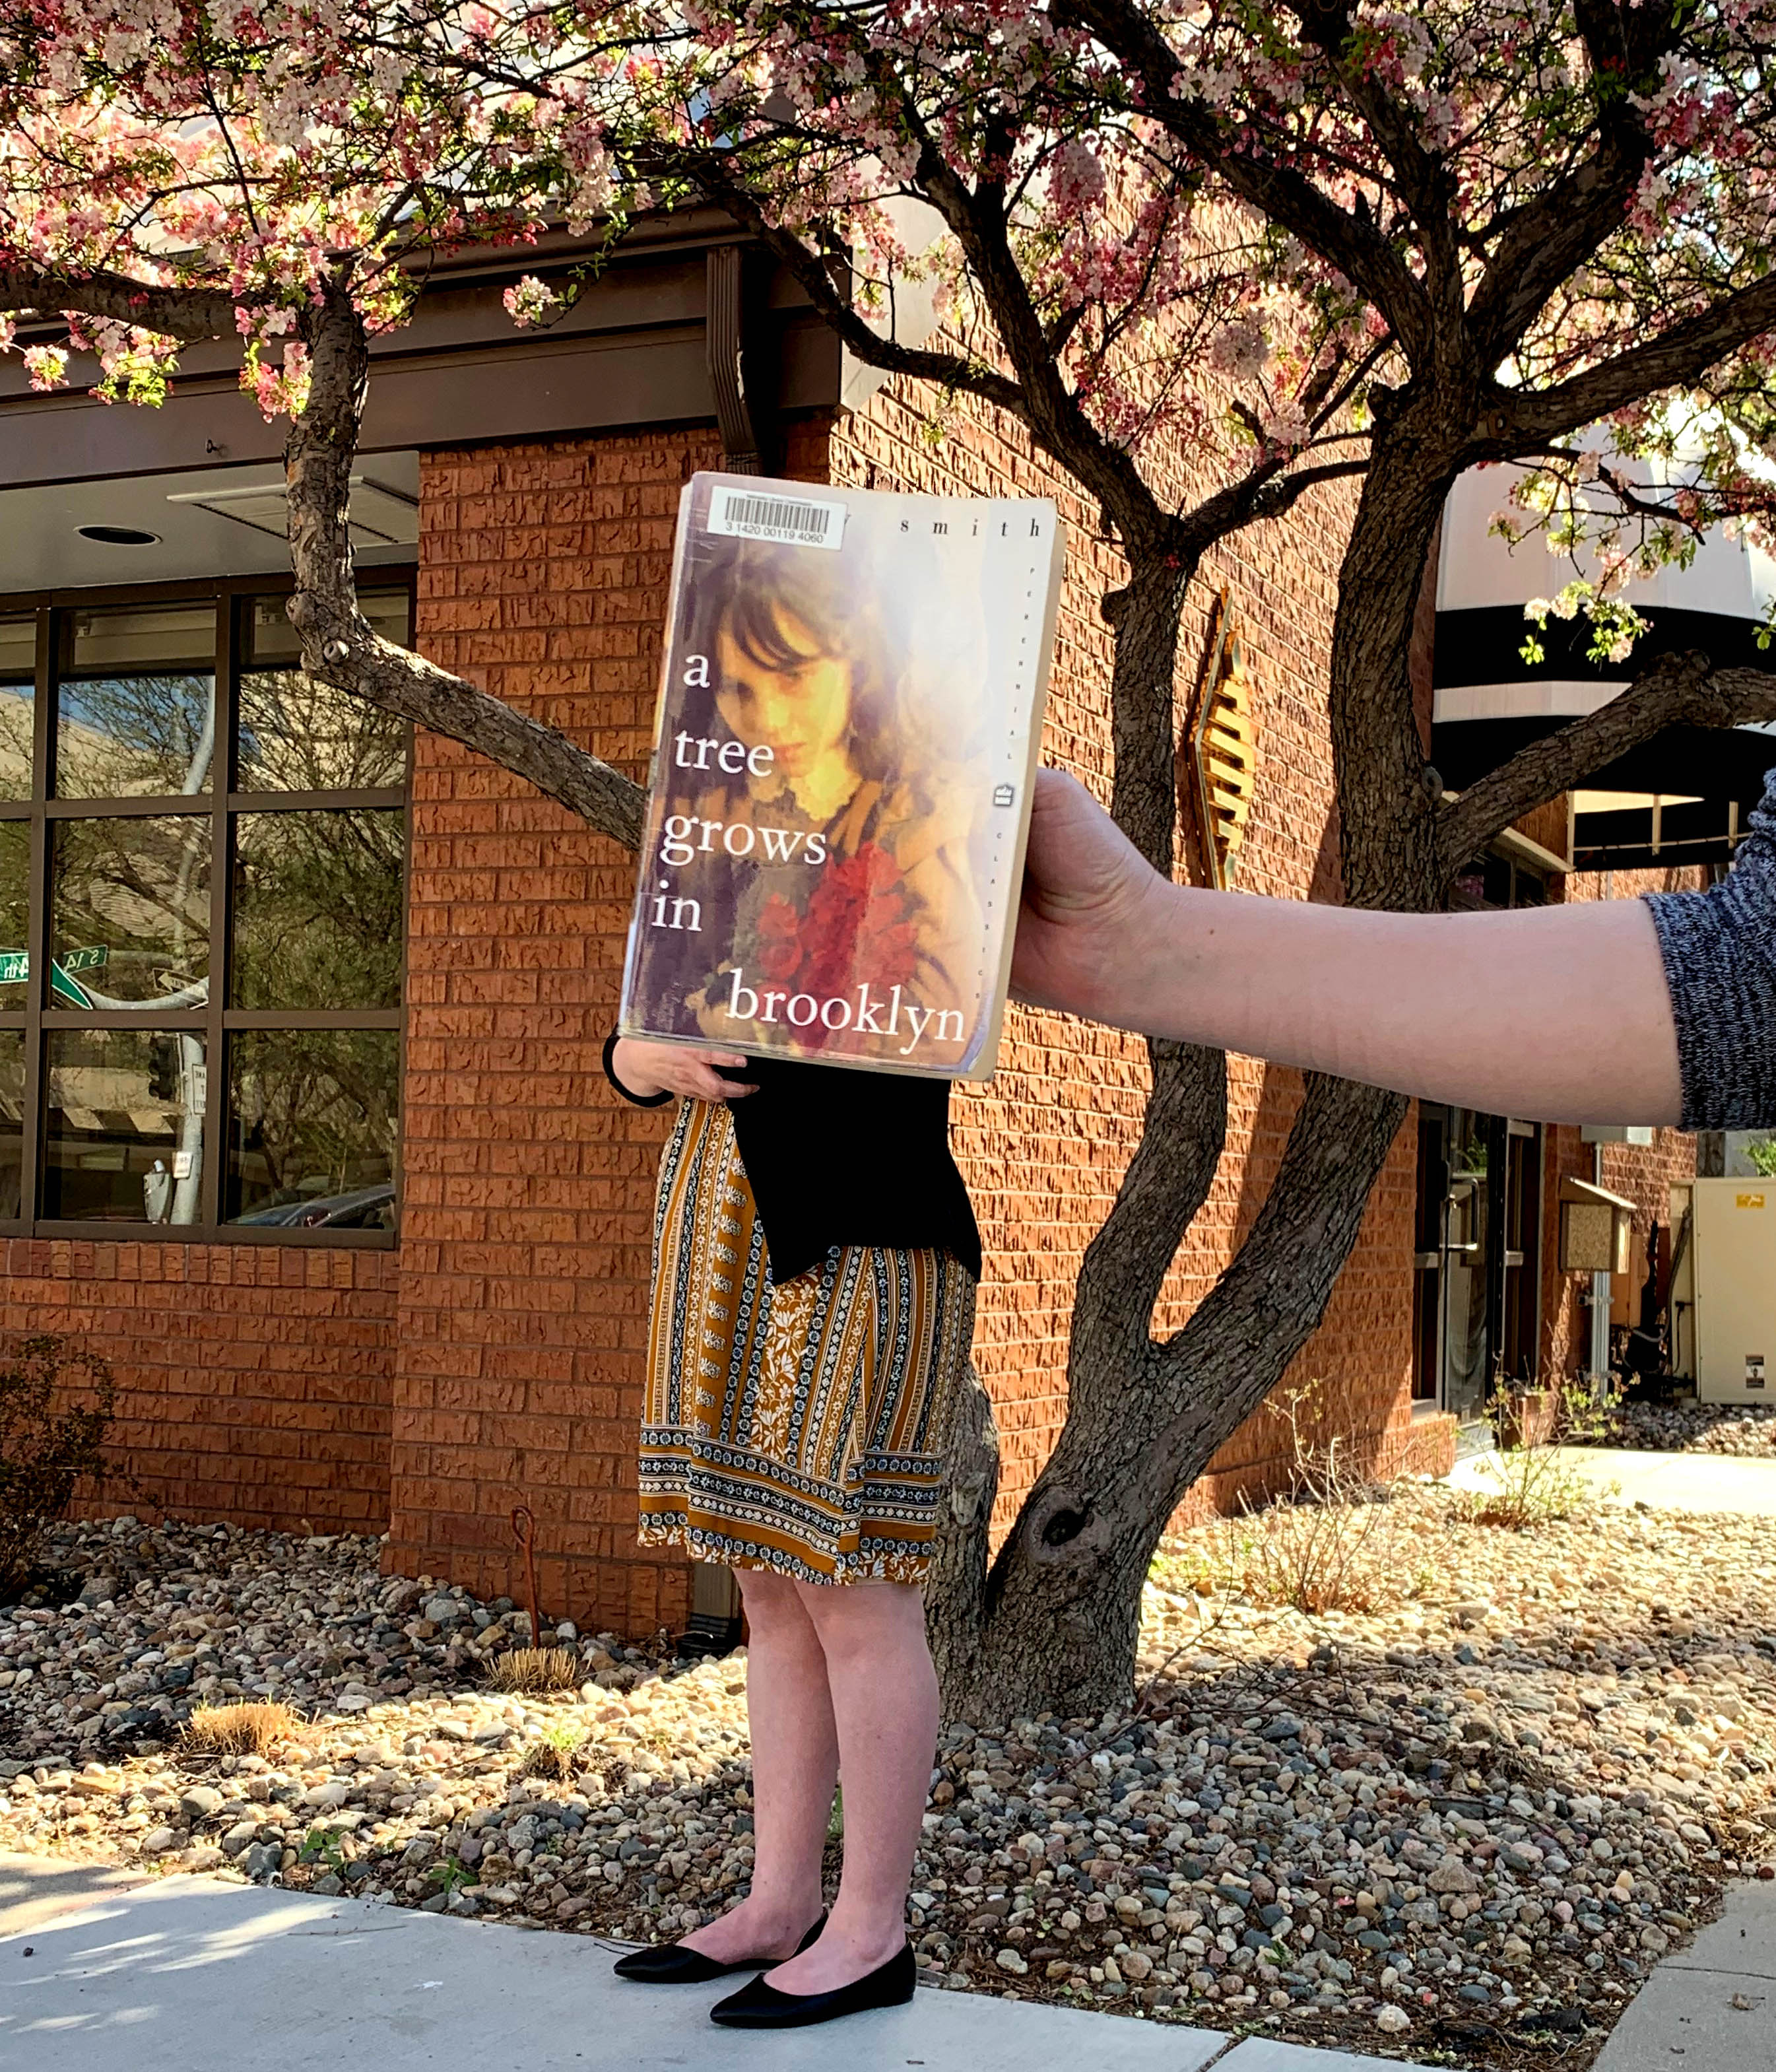 "A Tree Grows in Brooklyn" by Betty Smith BookFace Photo